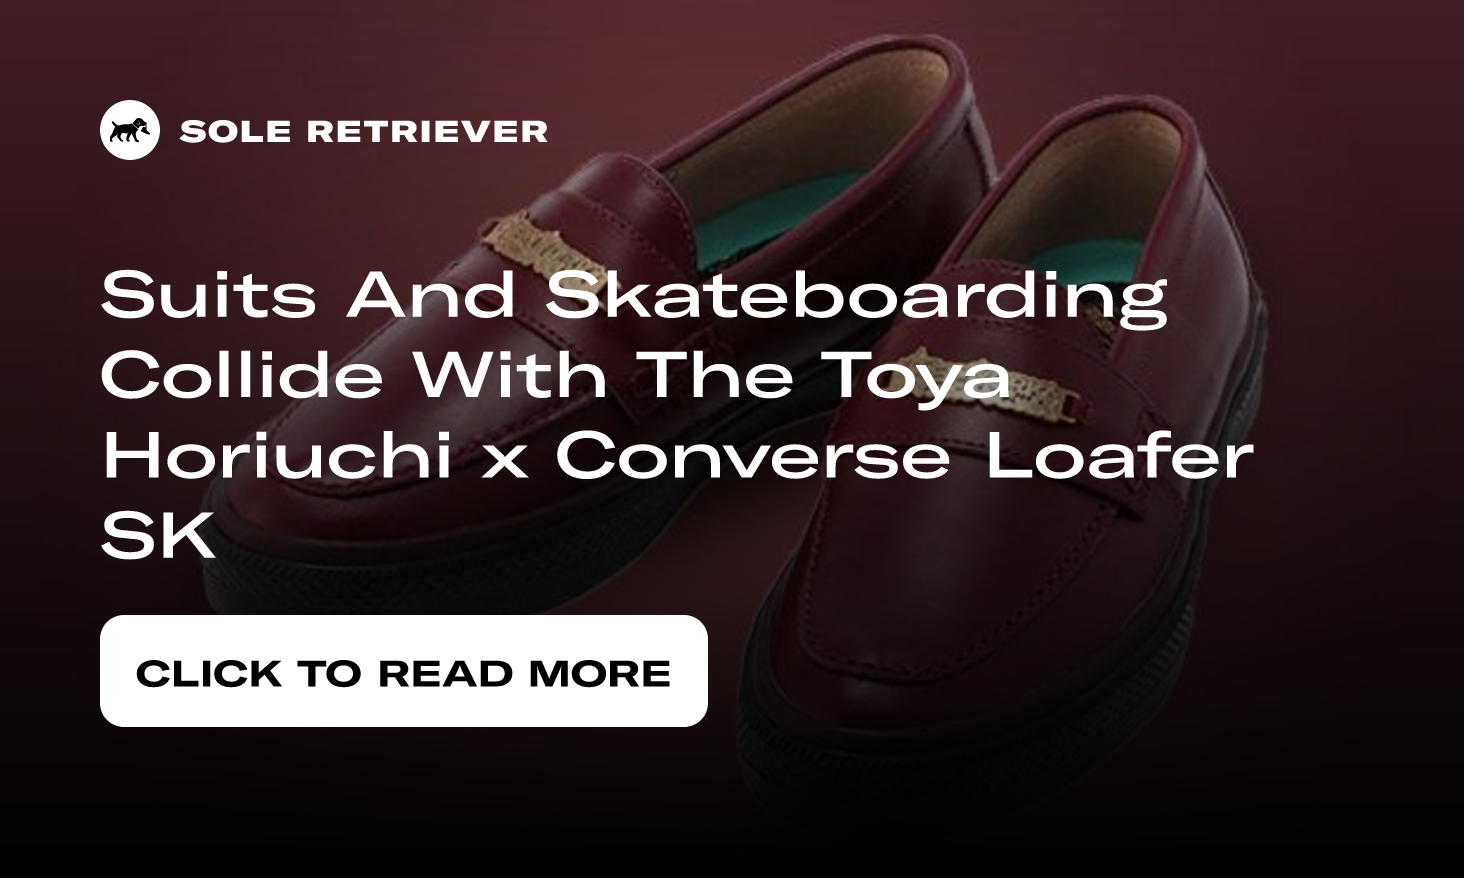 Suits And Skateboarding Collide With The Toya Horiuchi x Converse